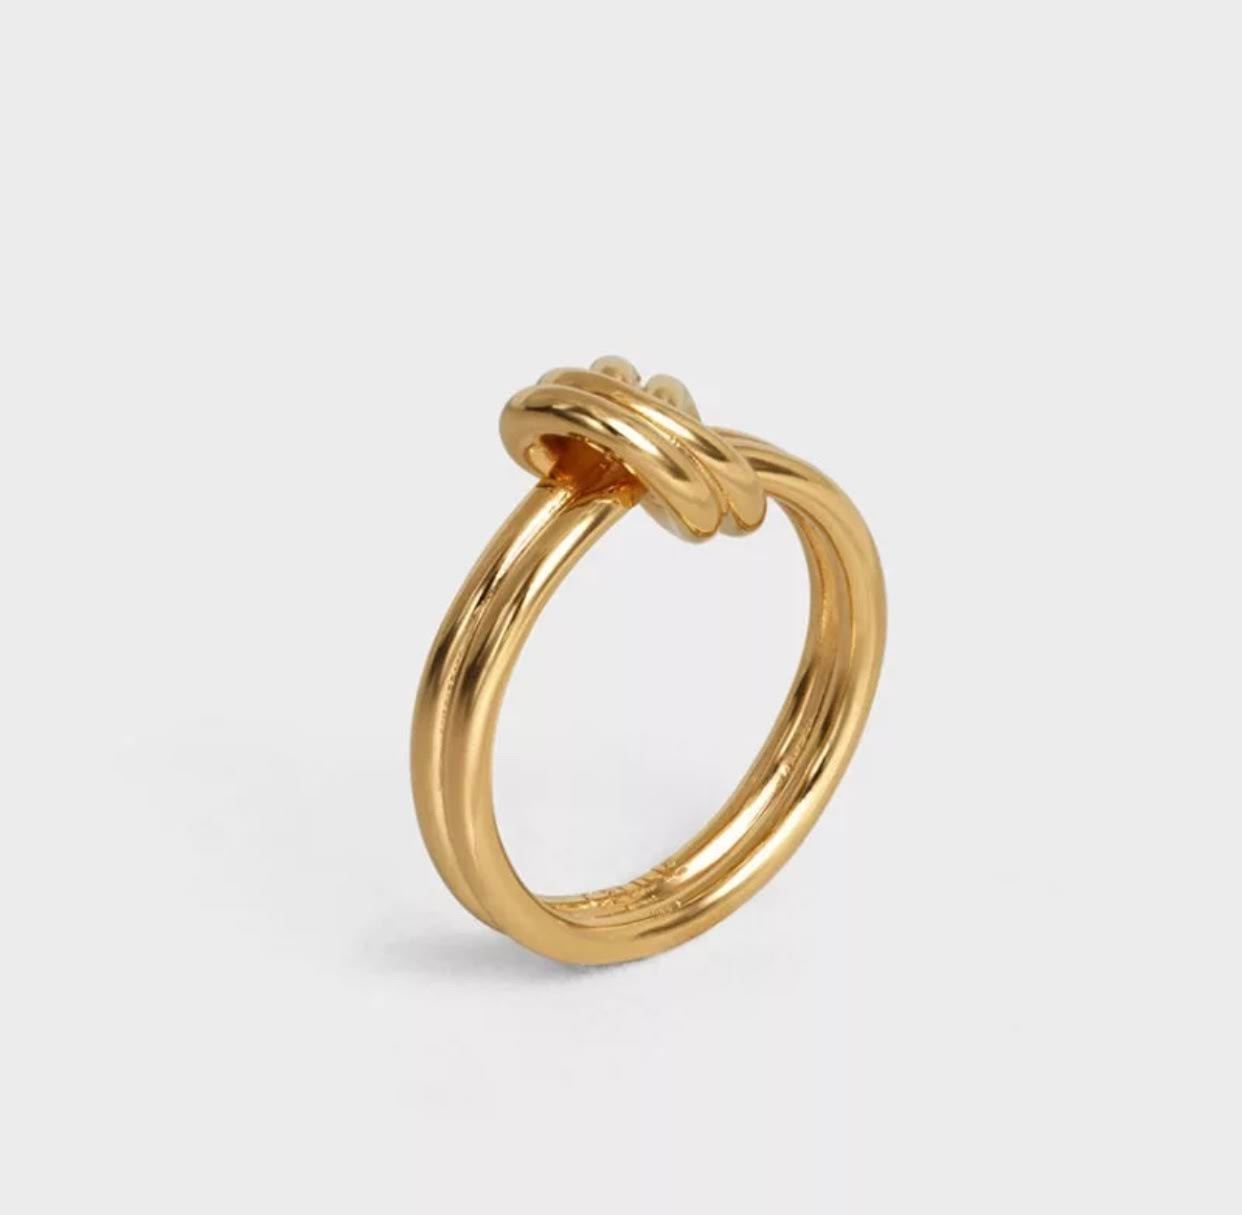 Knot-promise-ring-Love-knot-1-oak-jewelry